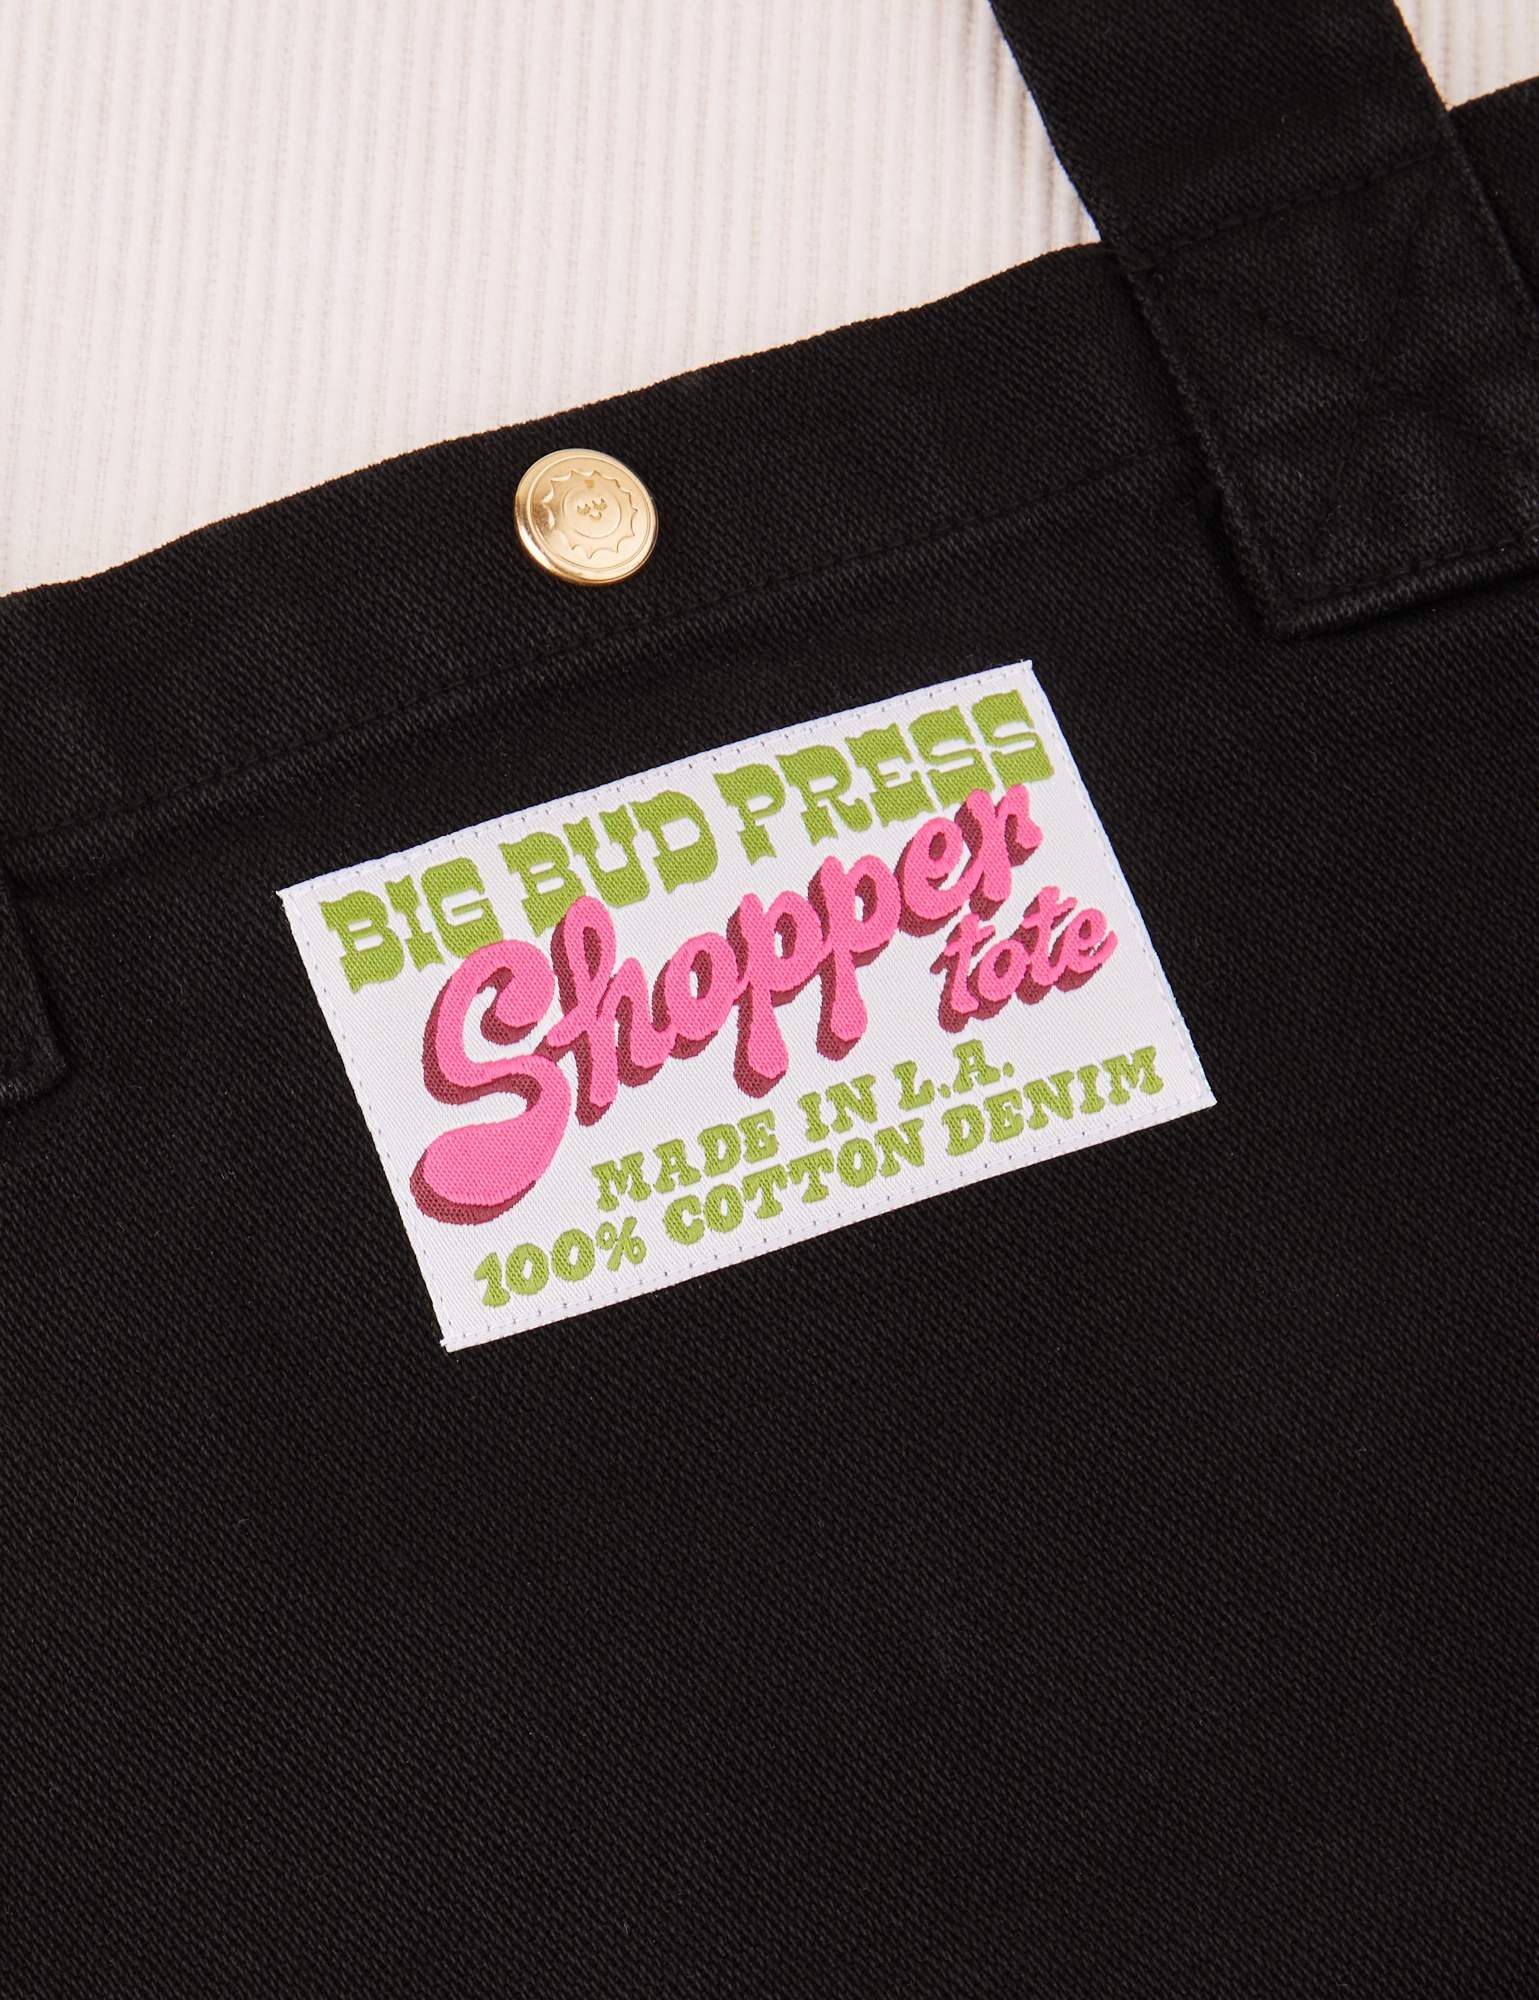 Sun Baby brass snap on Shopper Tote Bag in Black. Bag label with green and pink text that reads &quot;Big Bud Press Shopper Tote, Made in L.A., 100% Cotton Denim&quot; on white background